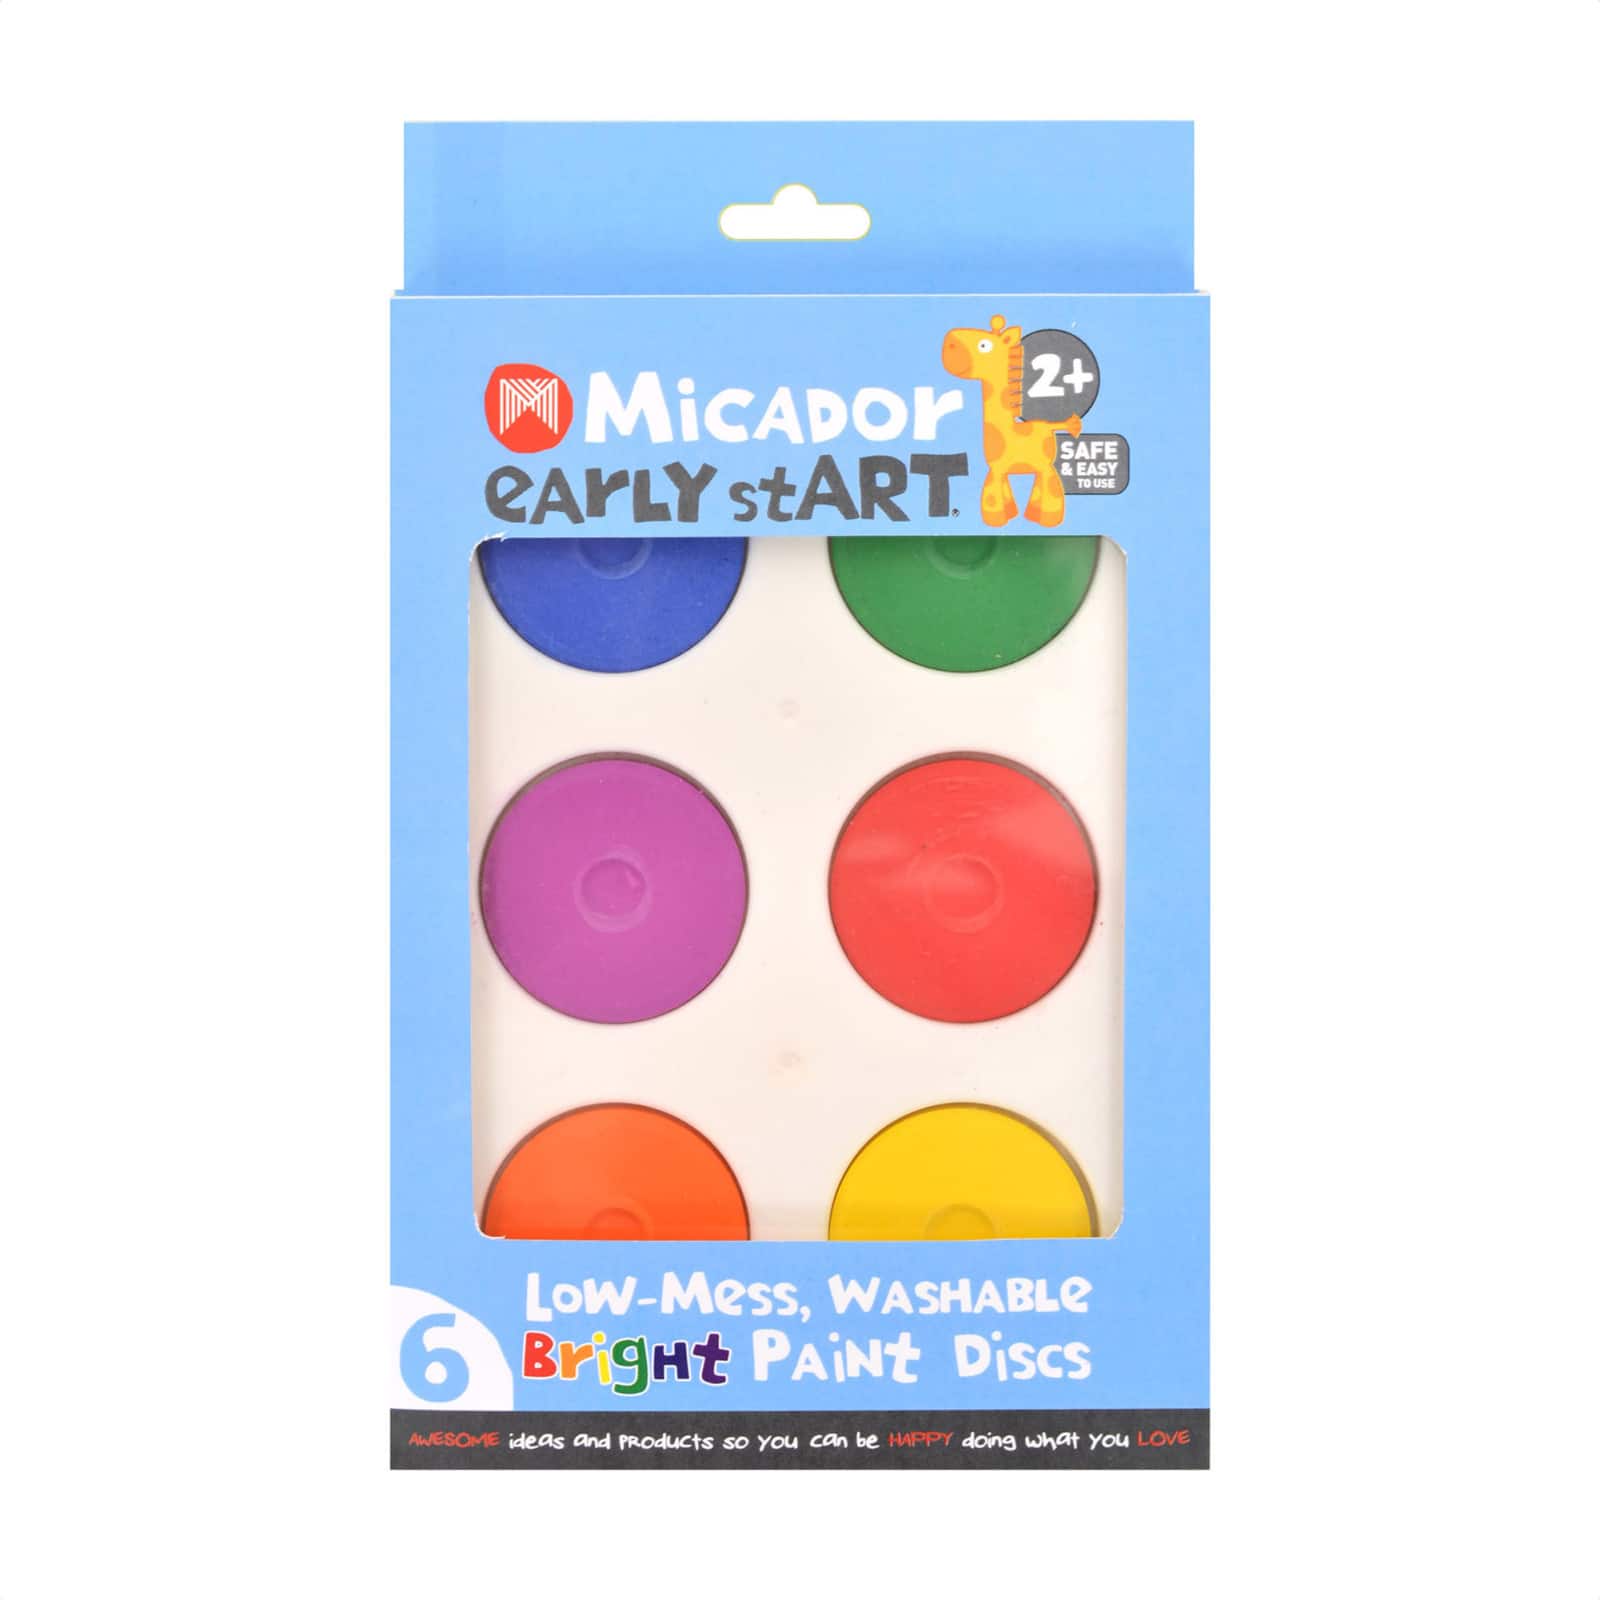 Micador Early stART Low-Mess Washable Paint Disc Set, Bright